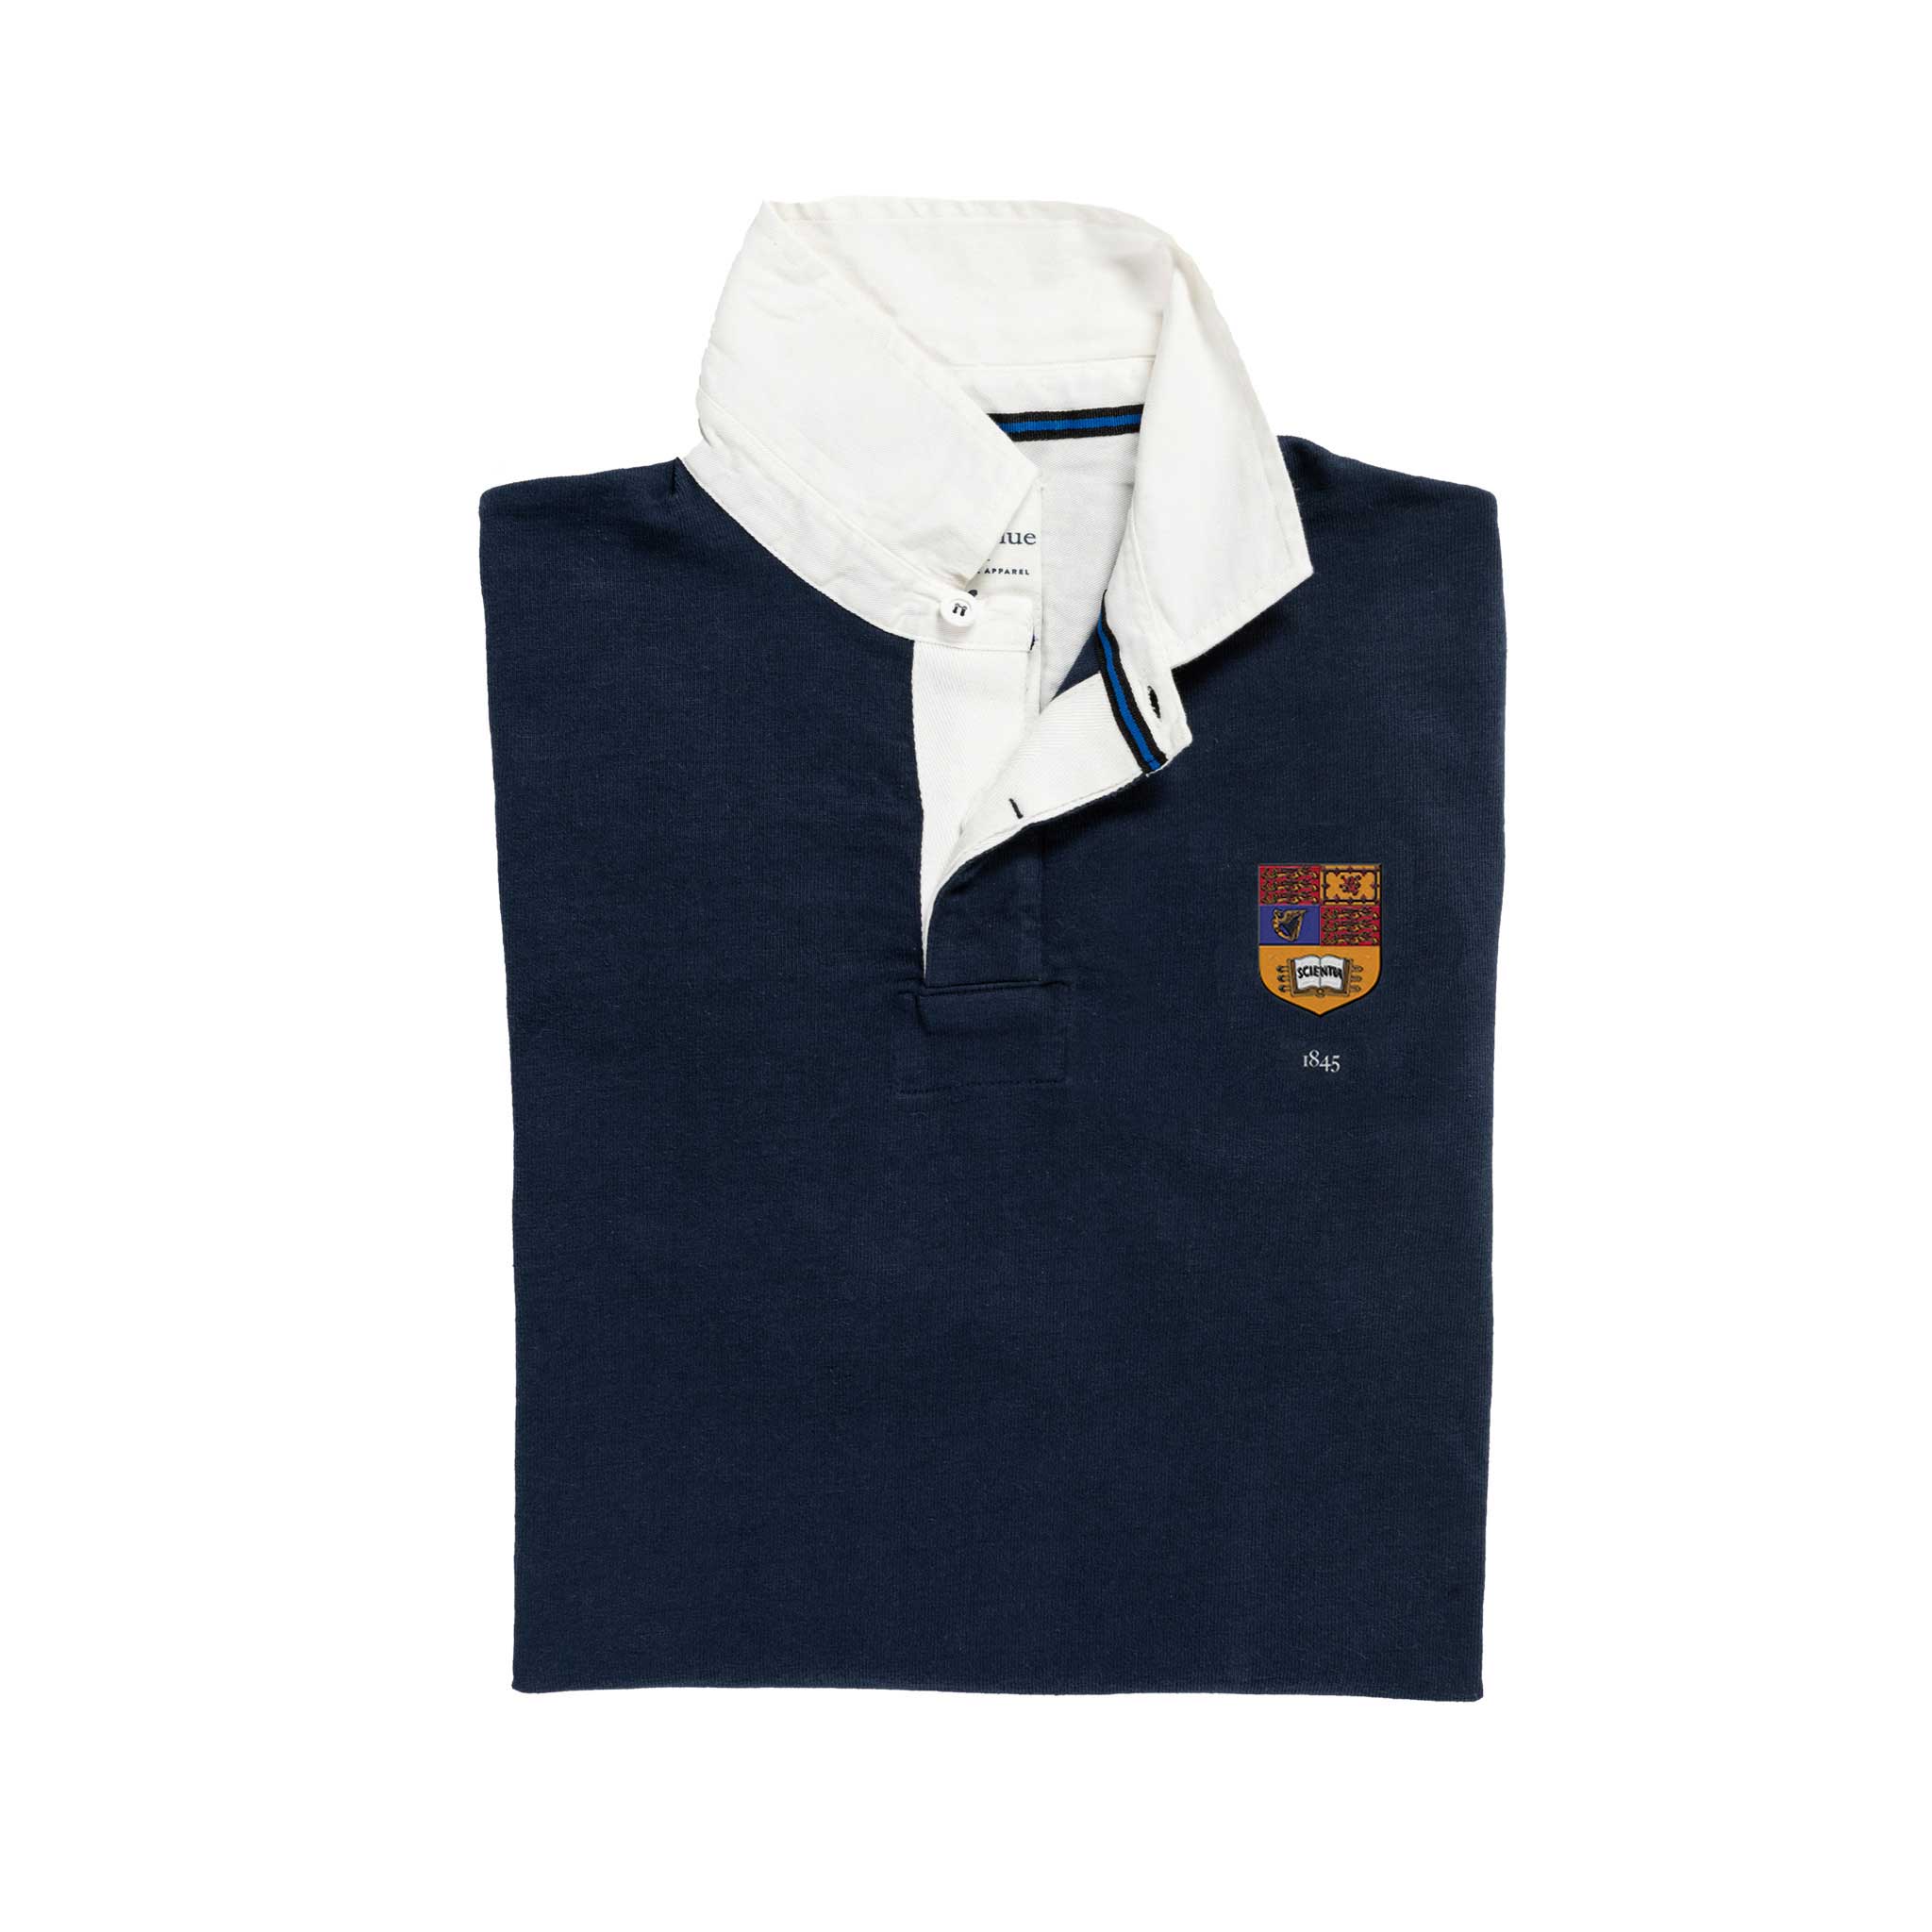 Imperial College 1845 Rugby Shirt_Folded